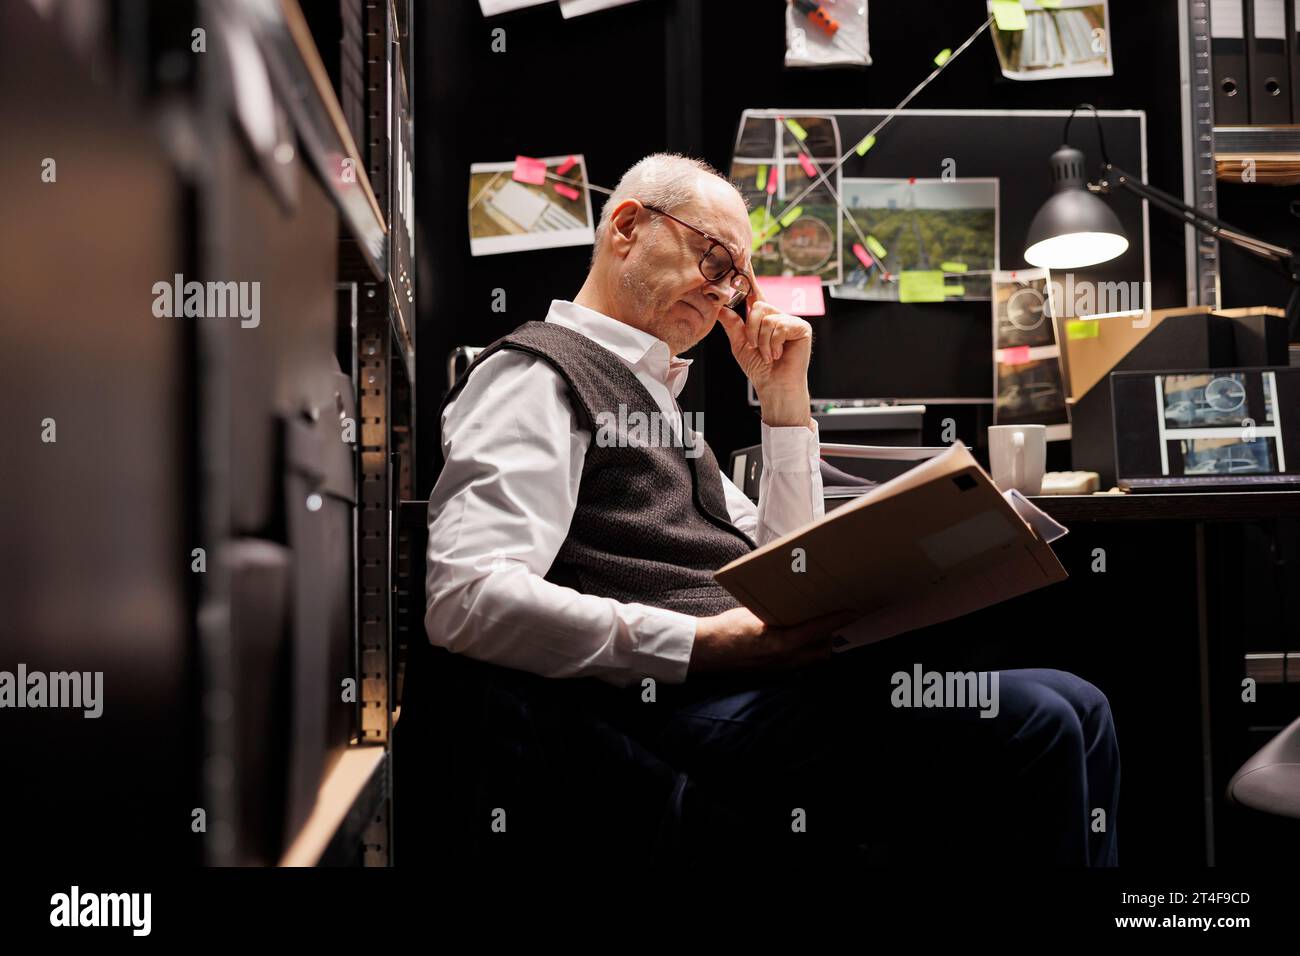 Old police officer working overtime at missing person case, analyzing crime scene evidence. Elderly private detective sitting at desk reading confidential victim files in arhive room Stock Photo